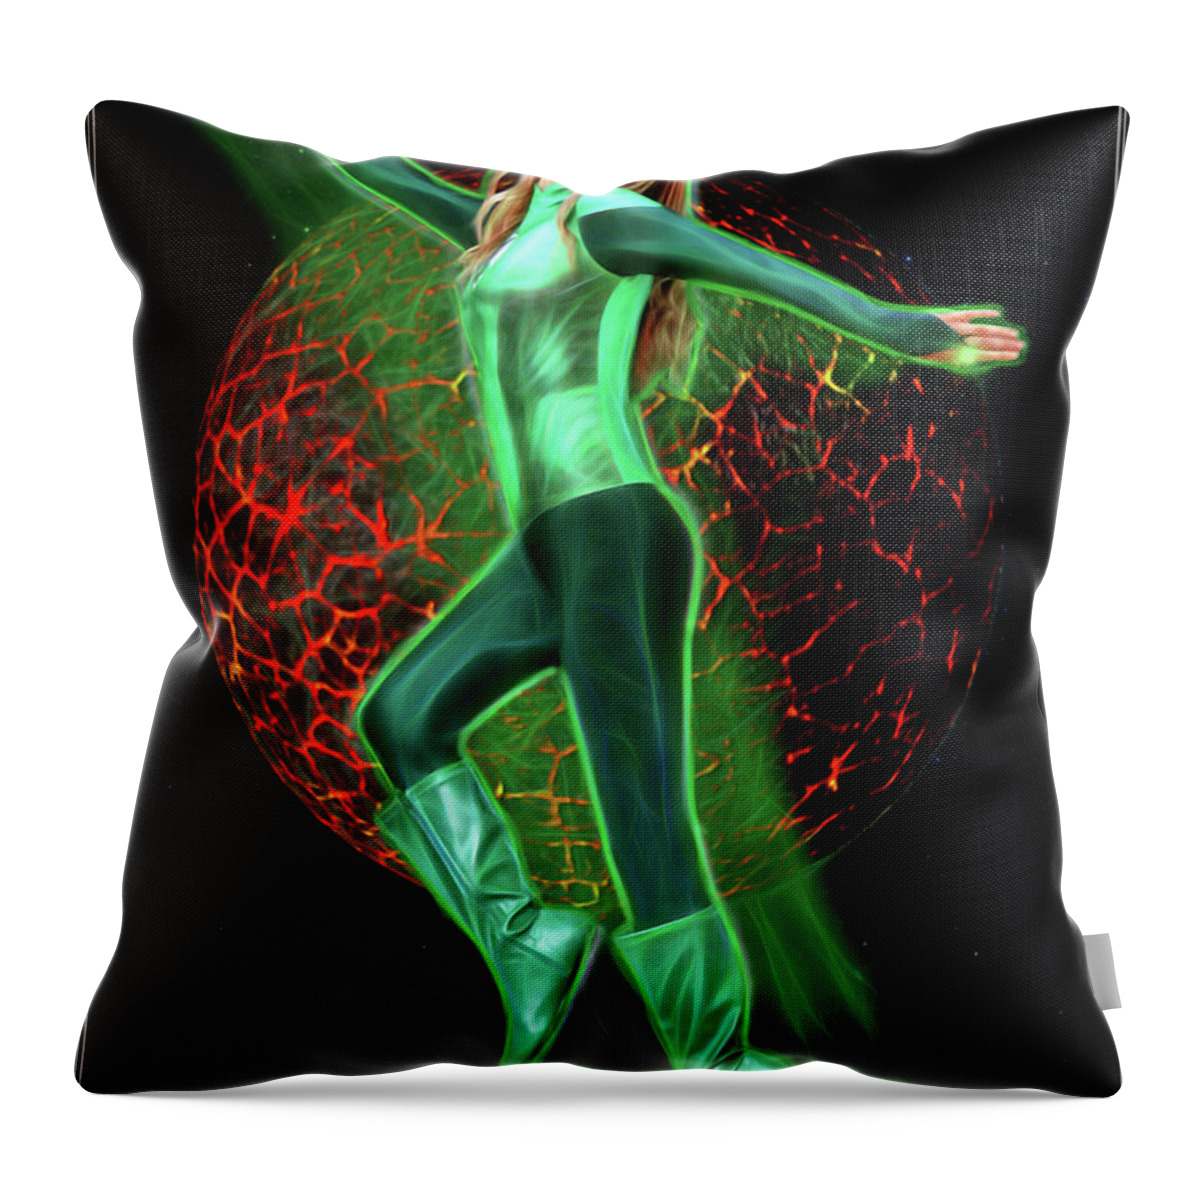 Green Throw Pillow featuring the photograph Space Frolic by Jon Volden